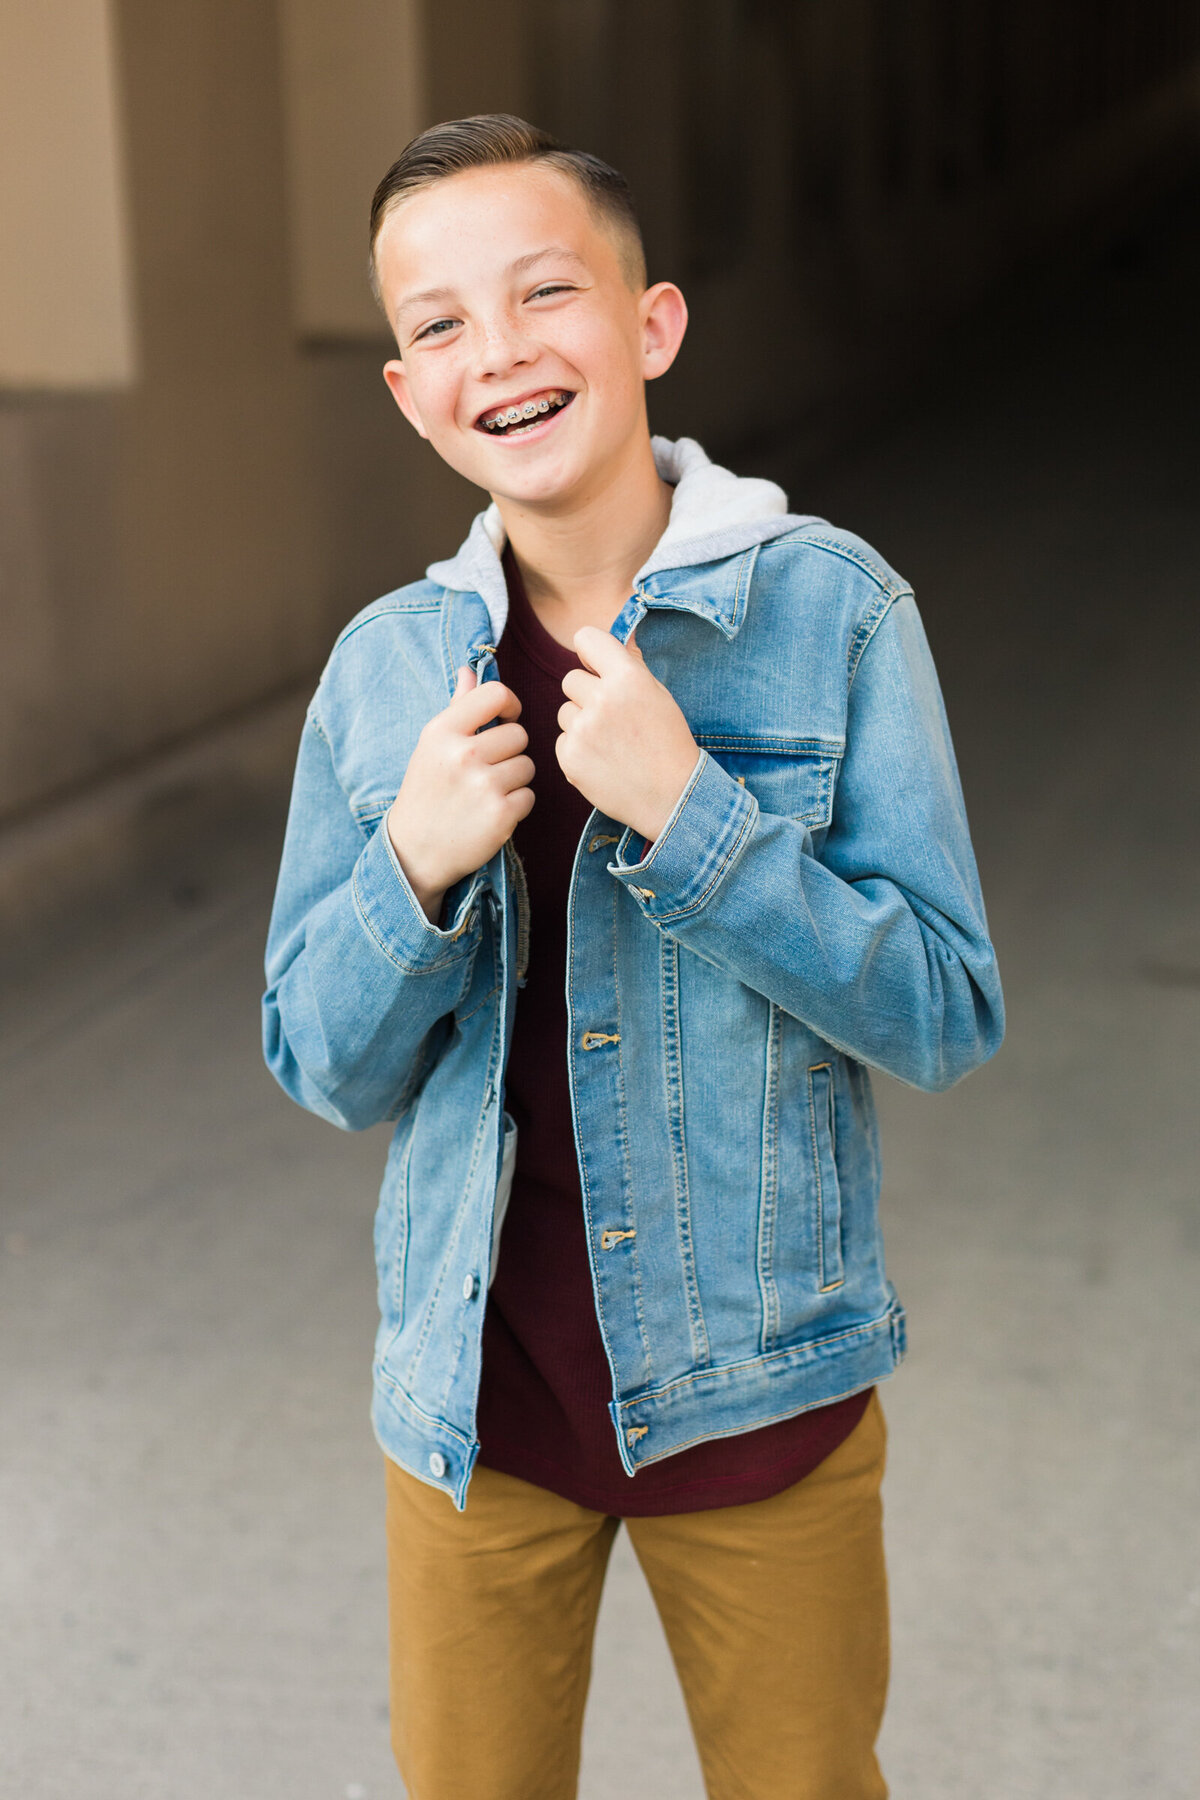 young boy smiling for photo